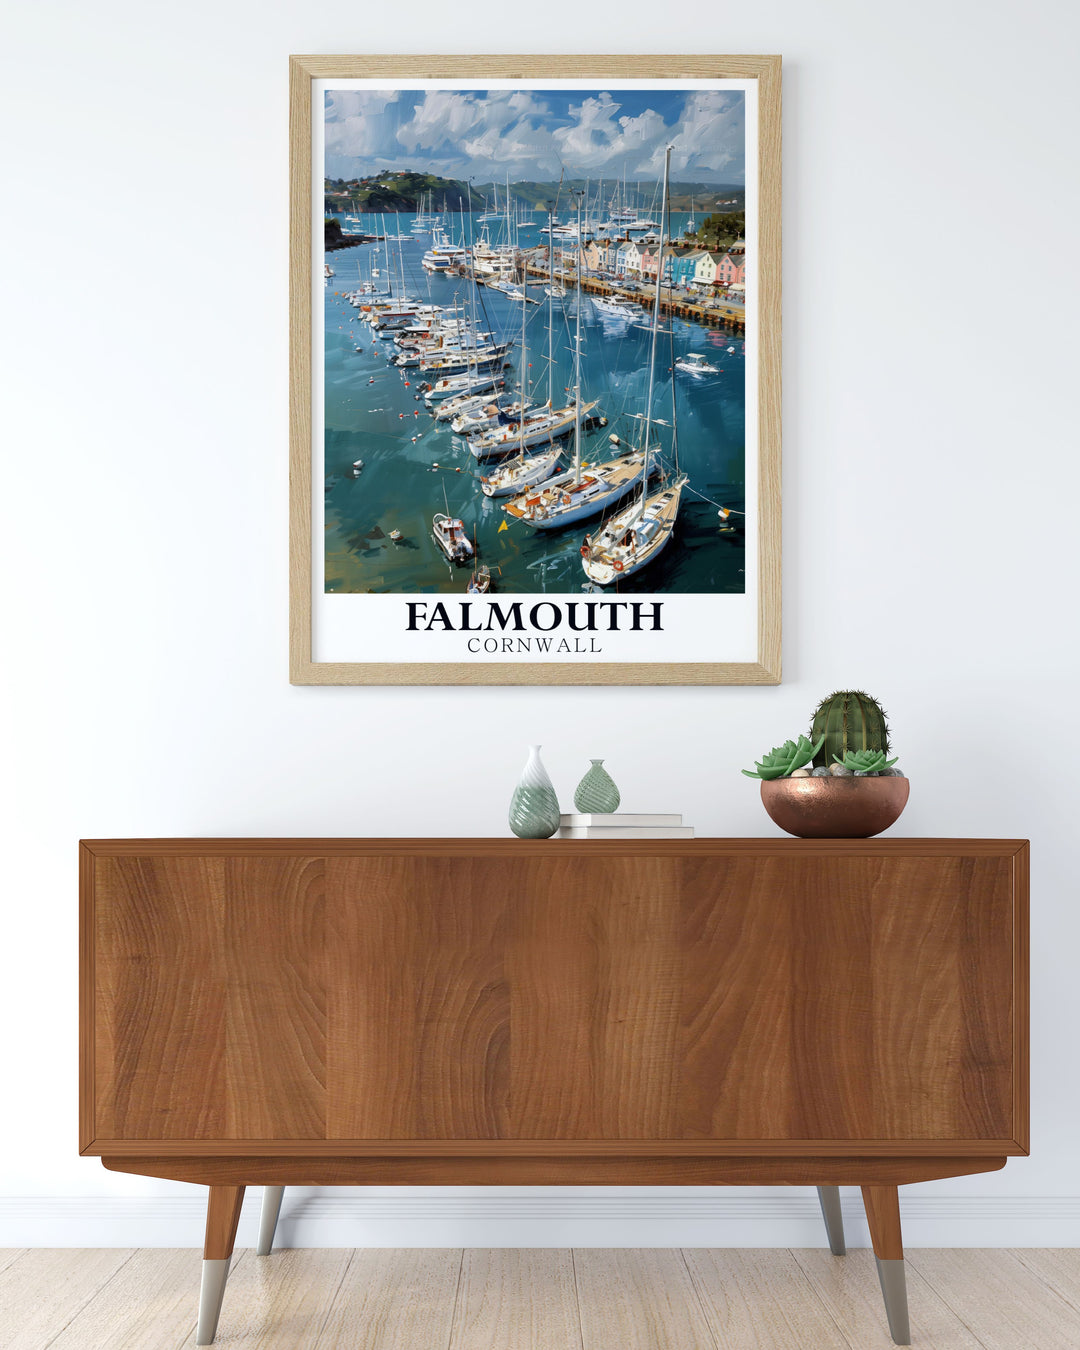 Falmouth Harbour home decor piece showcasing the picturesque view of the harbour in Cornwall. This travel poster is a delightful addition to any room, bringing the calming influence of the sea and the vibrant port into your space.